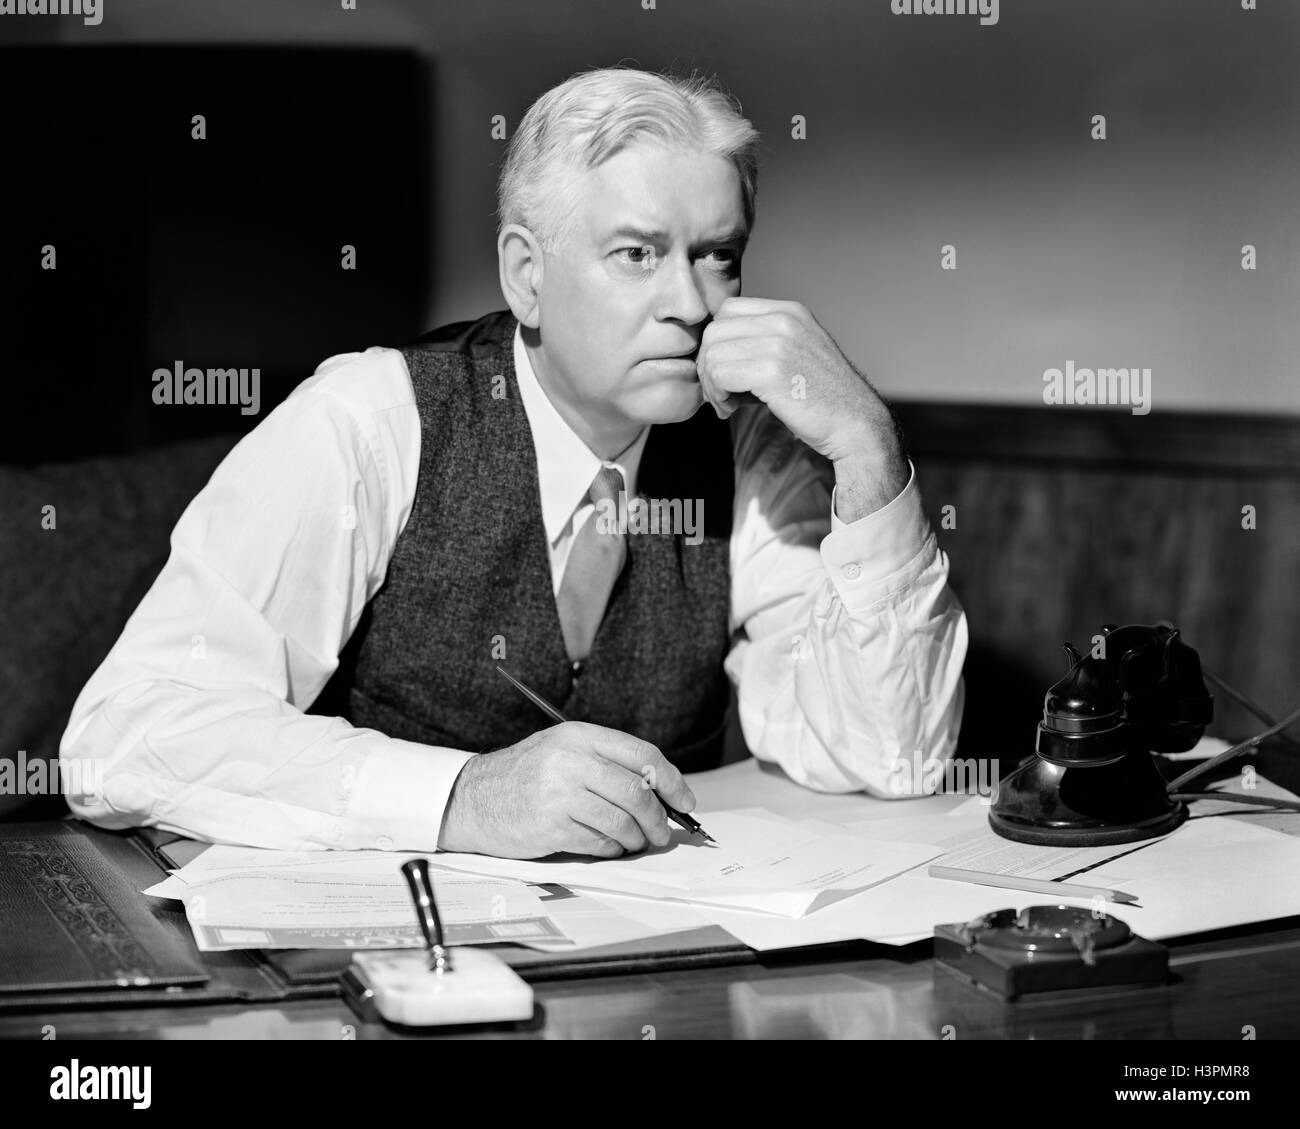 1920s 1930s WORRIED BUSINESSMAN WEARING VEST AND SHIRT SLEEVES SITTING AT DESK THINKING ABOUT SIGNING A DOCUMENT Stock Photo